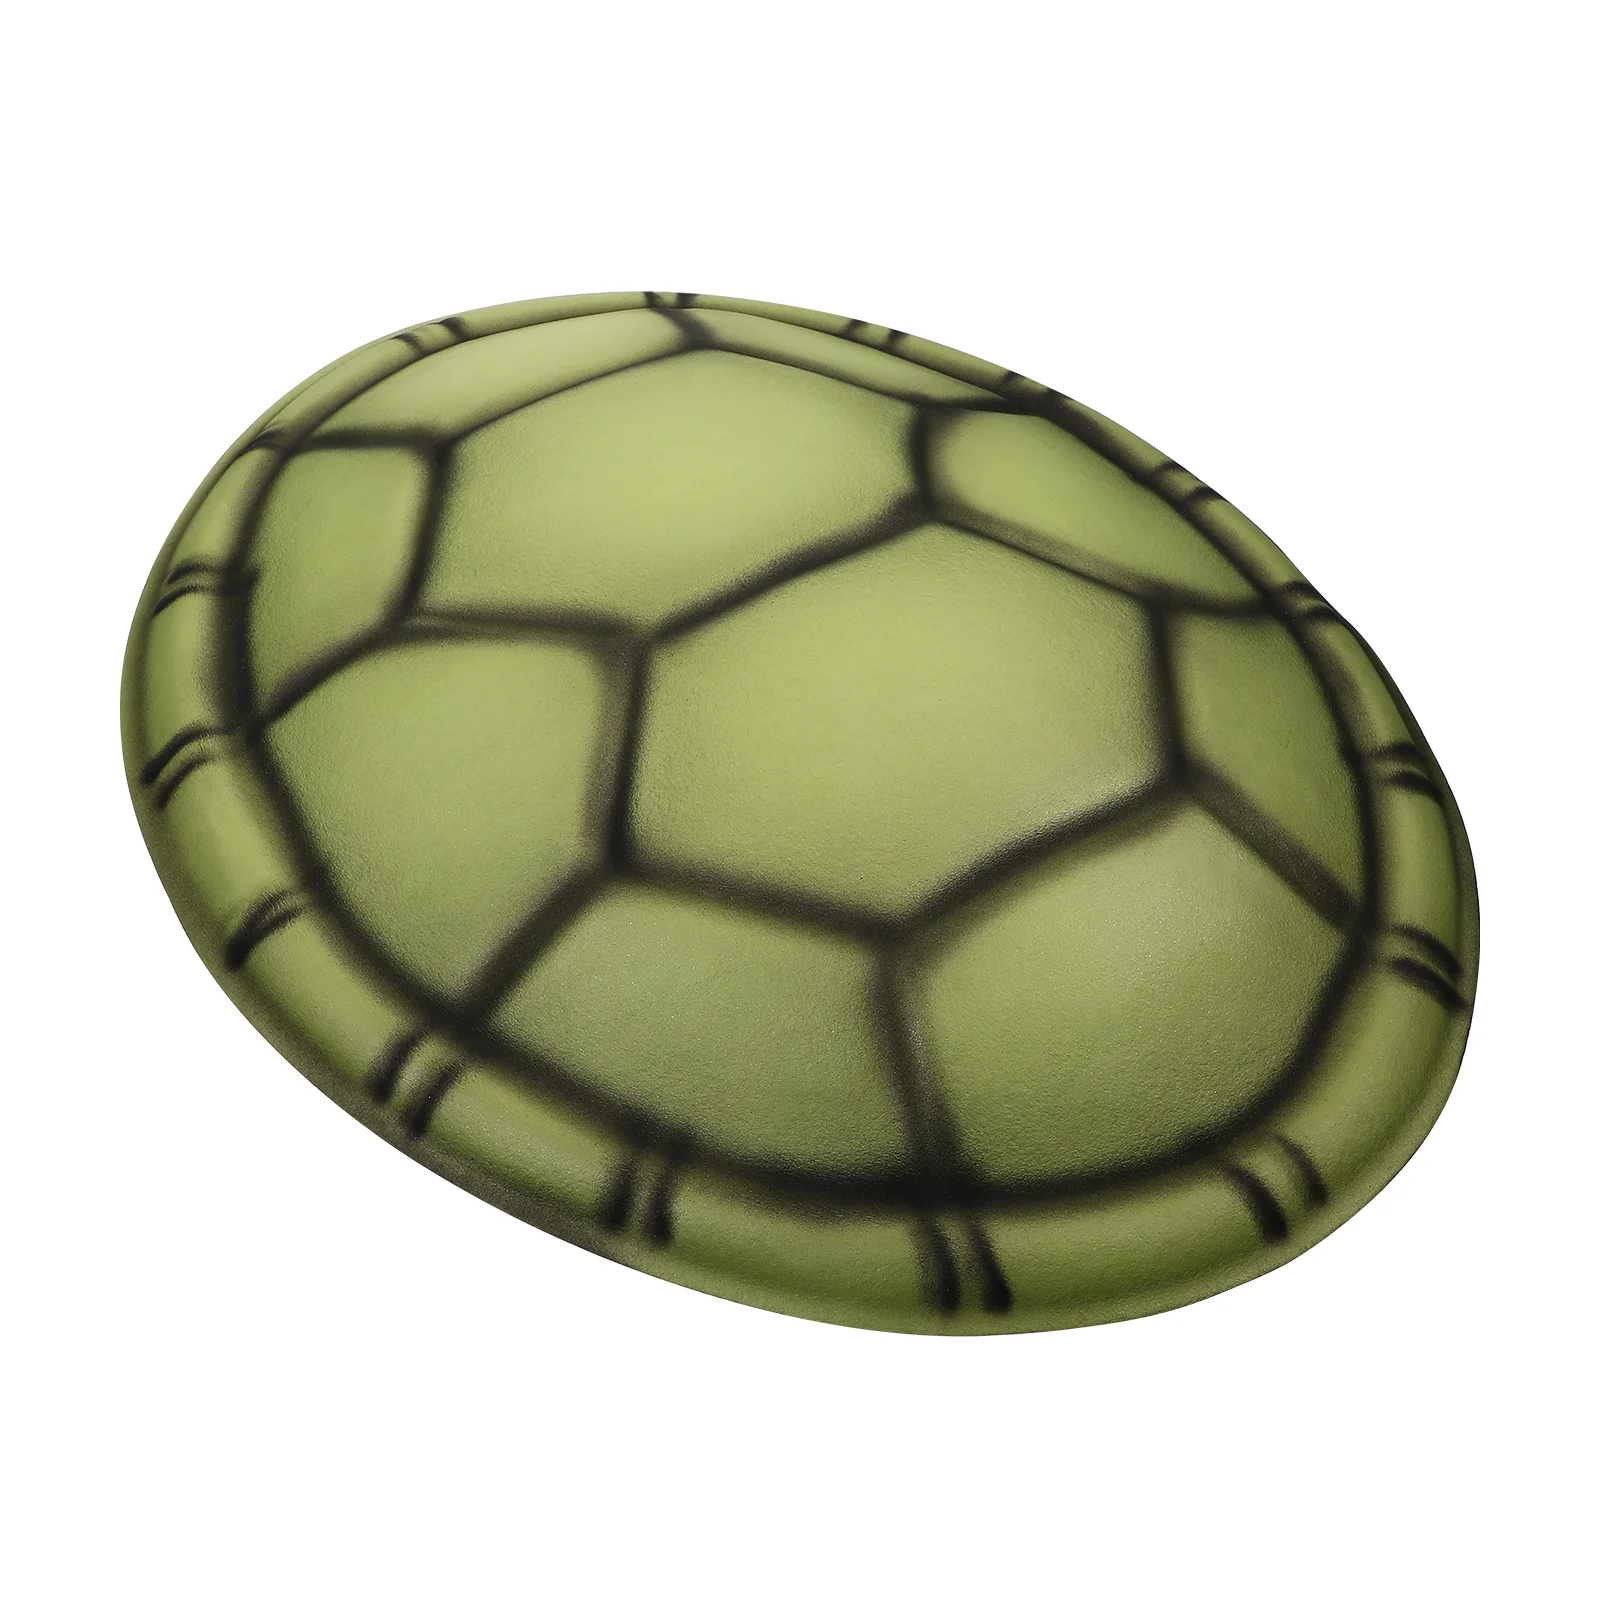 

KESYOO Turtle Shell Prop Performance Tortoise Shell Costume Halloween Party Costume Prop Cosplay Turtle Shell